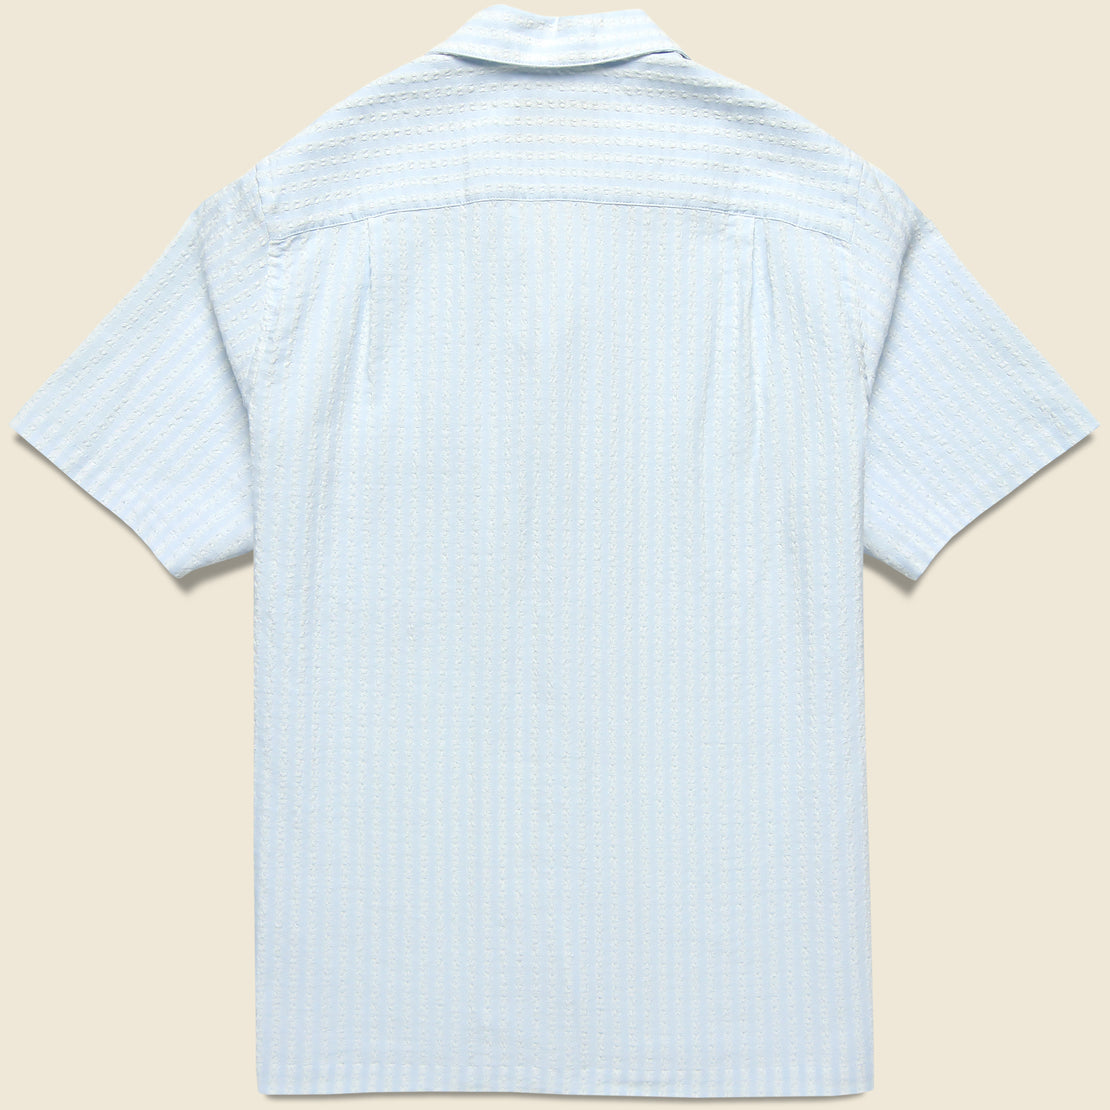 Jacquard Chambray Camp Shirt - Blue - Portuguese Flannel - STAG Provisions - Tops - S/S Woven - Stripe